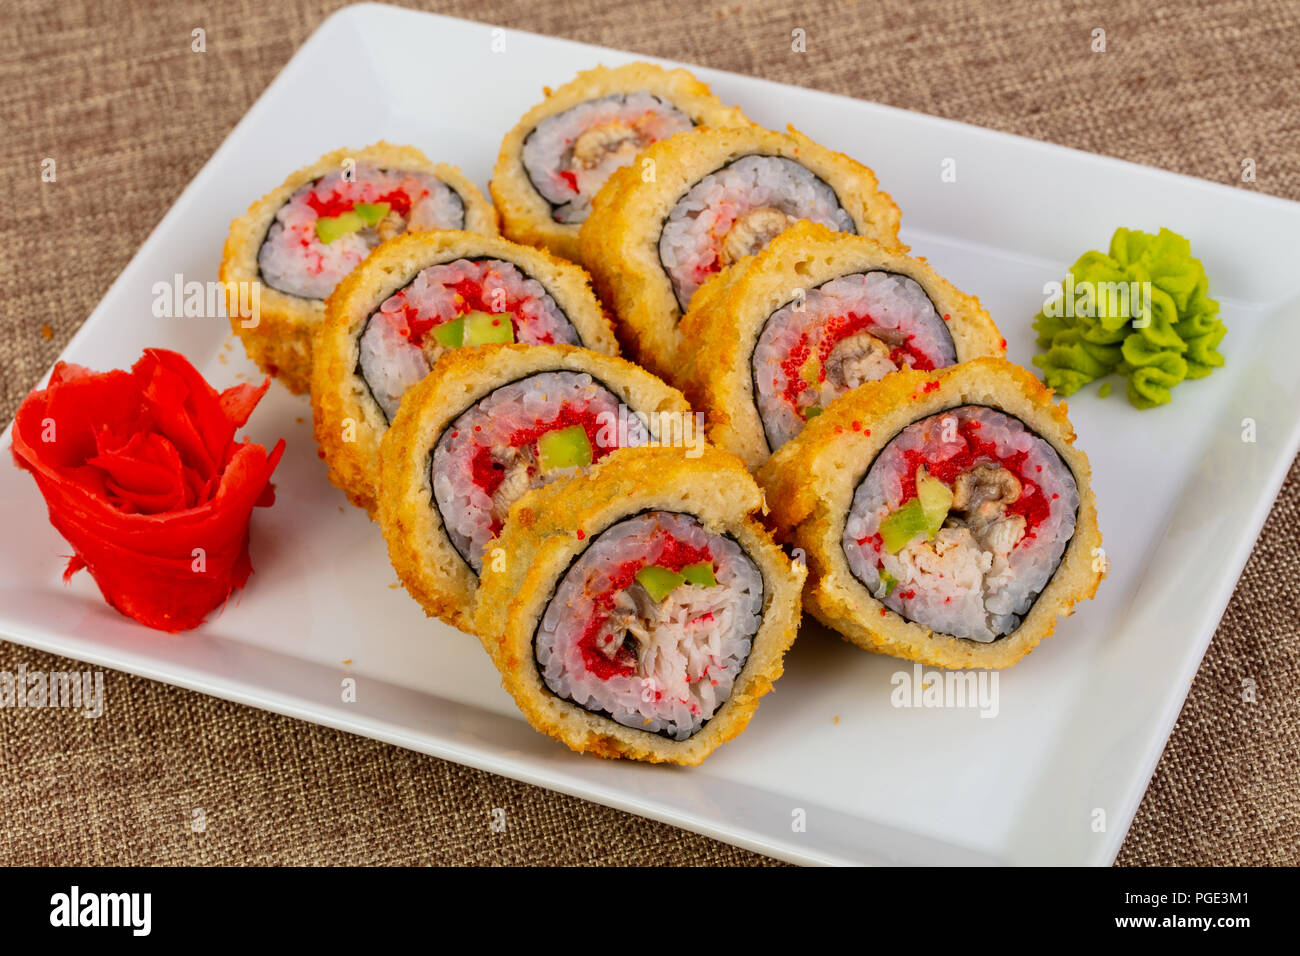 Tempura roll with crab meat Stock Photo - Alamy